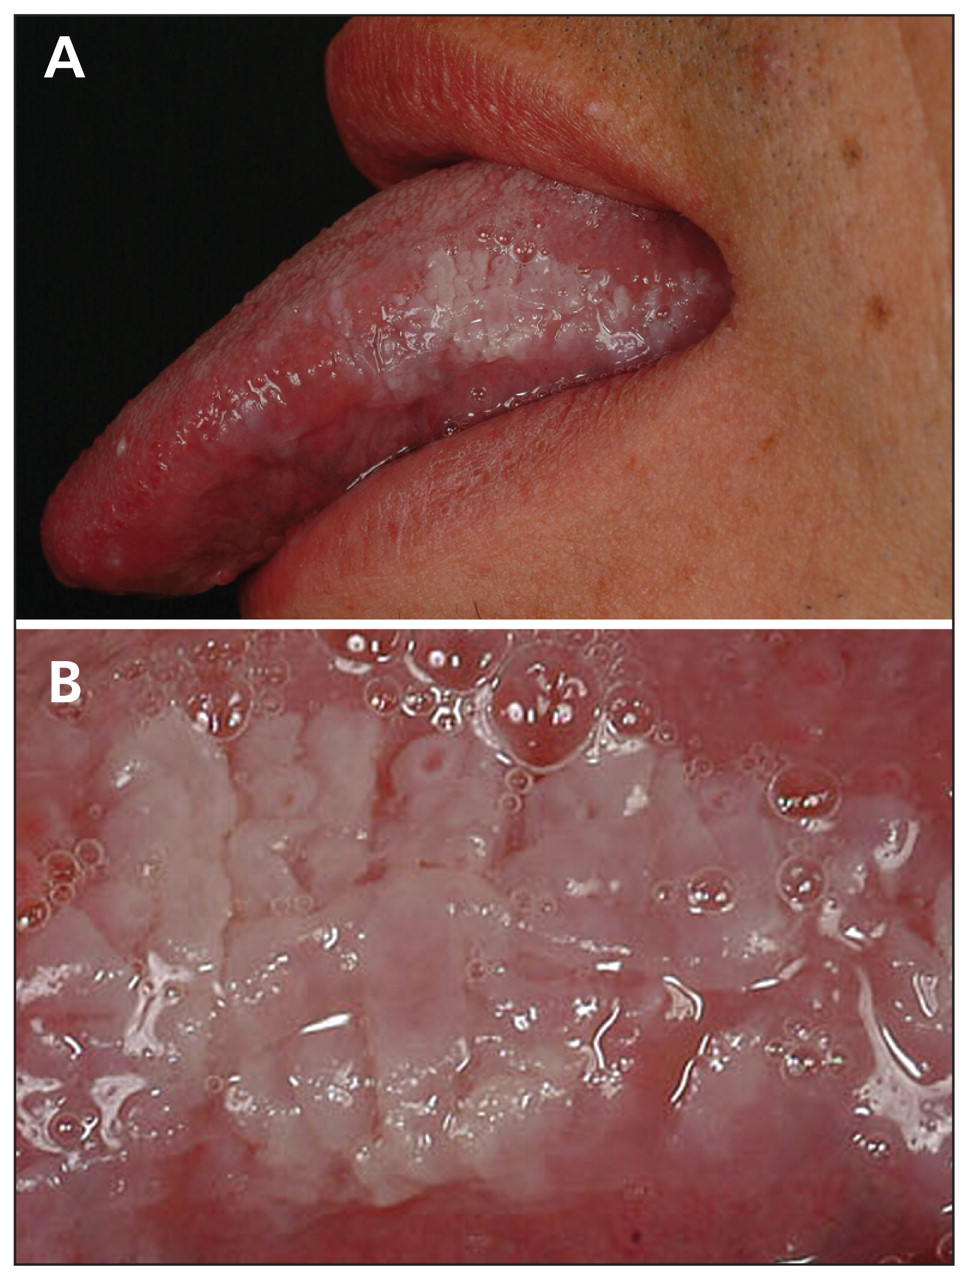 Oral hairy leukoplakia: a clinical indicator of ...